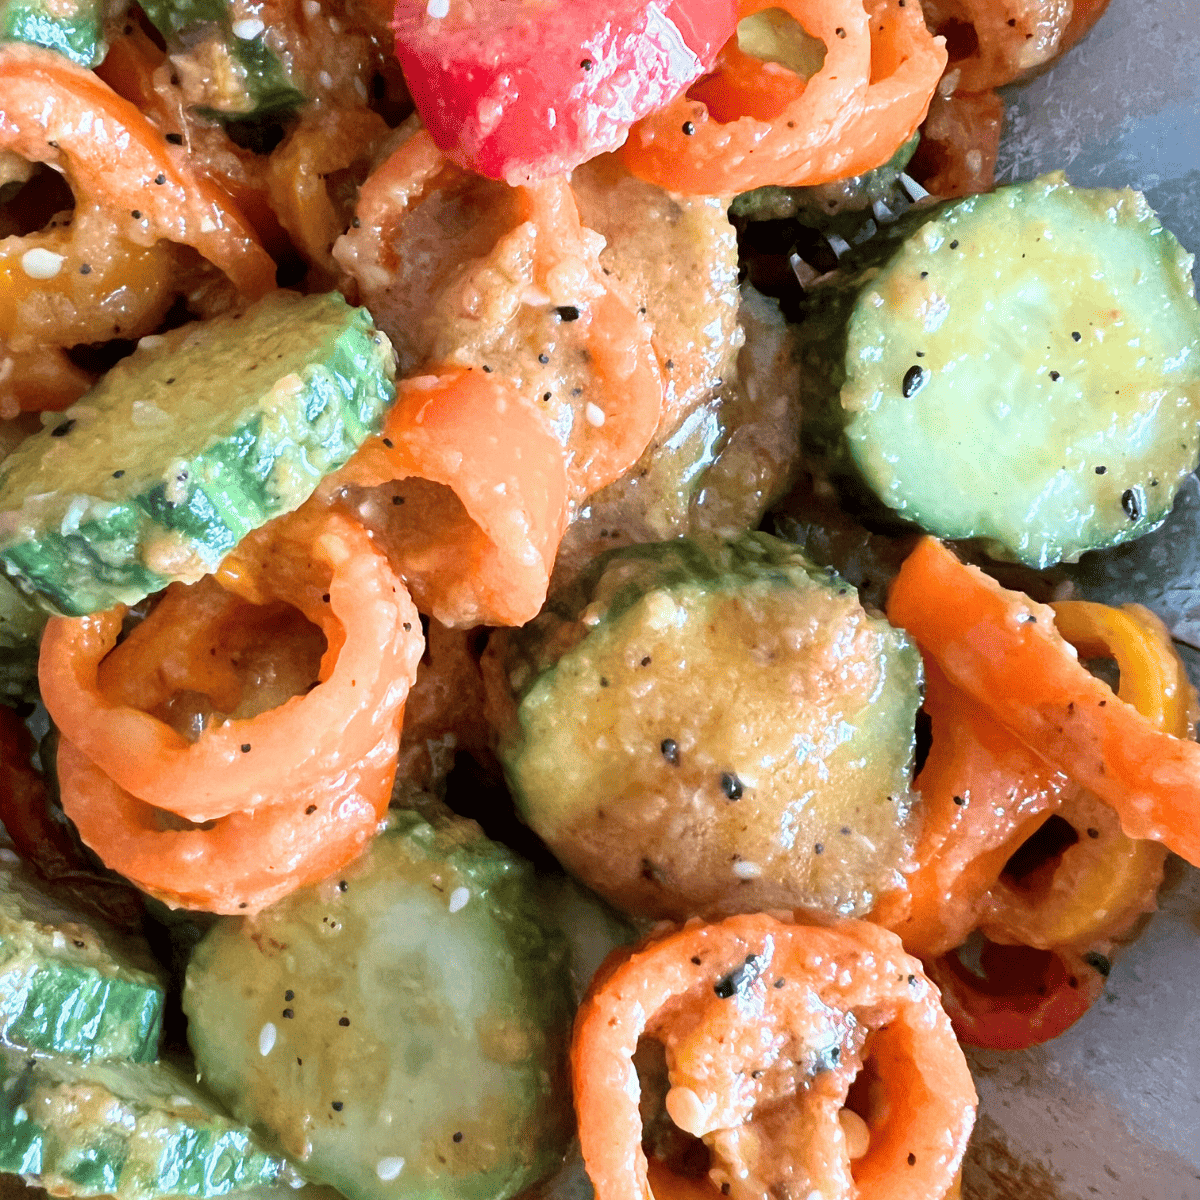 This fresh salad is made with crisp cucumbers and sweet mini peppers and you only need 5 ingredients to make it.  The combination of cucumbers, sweet peppers, and dressing, creates a delightful crunch and burst of flavor in every bite